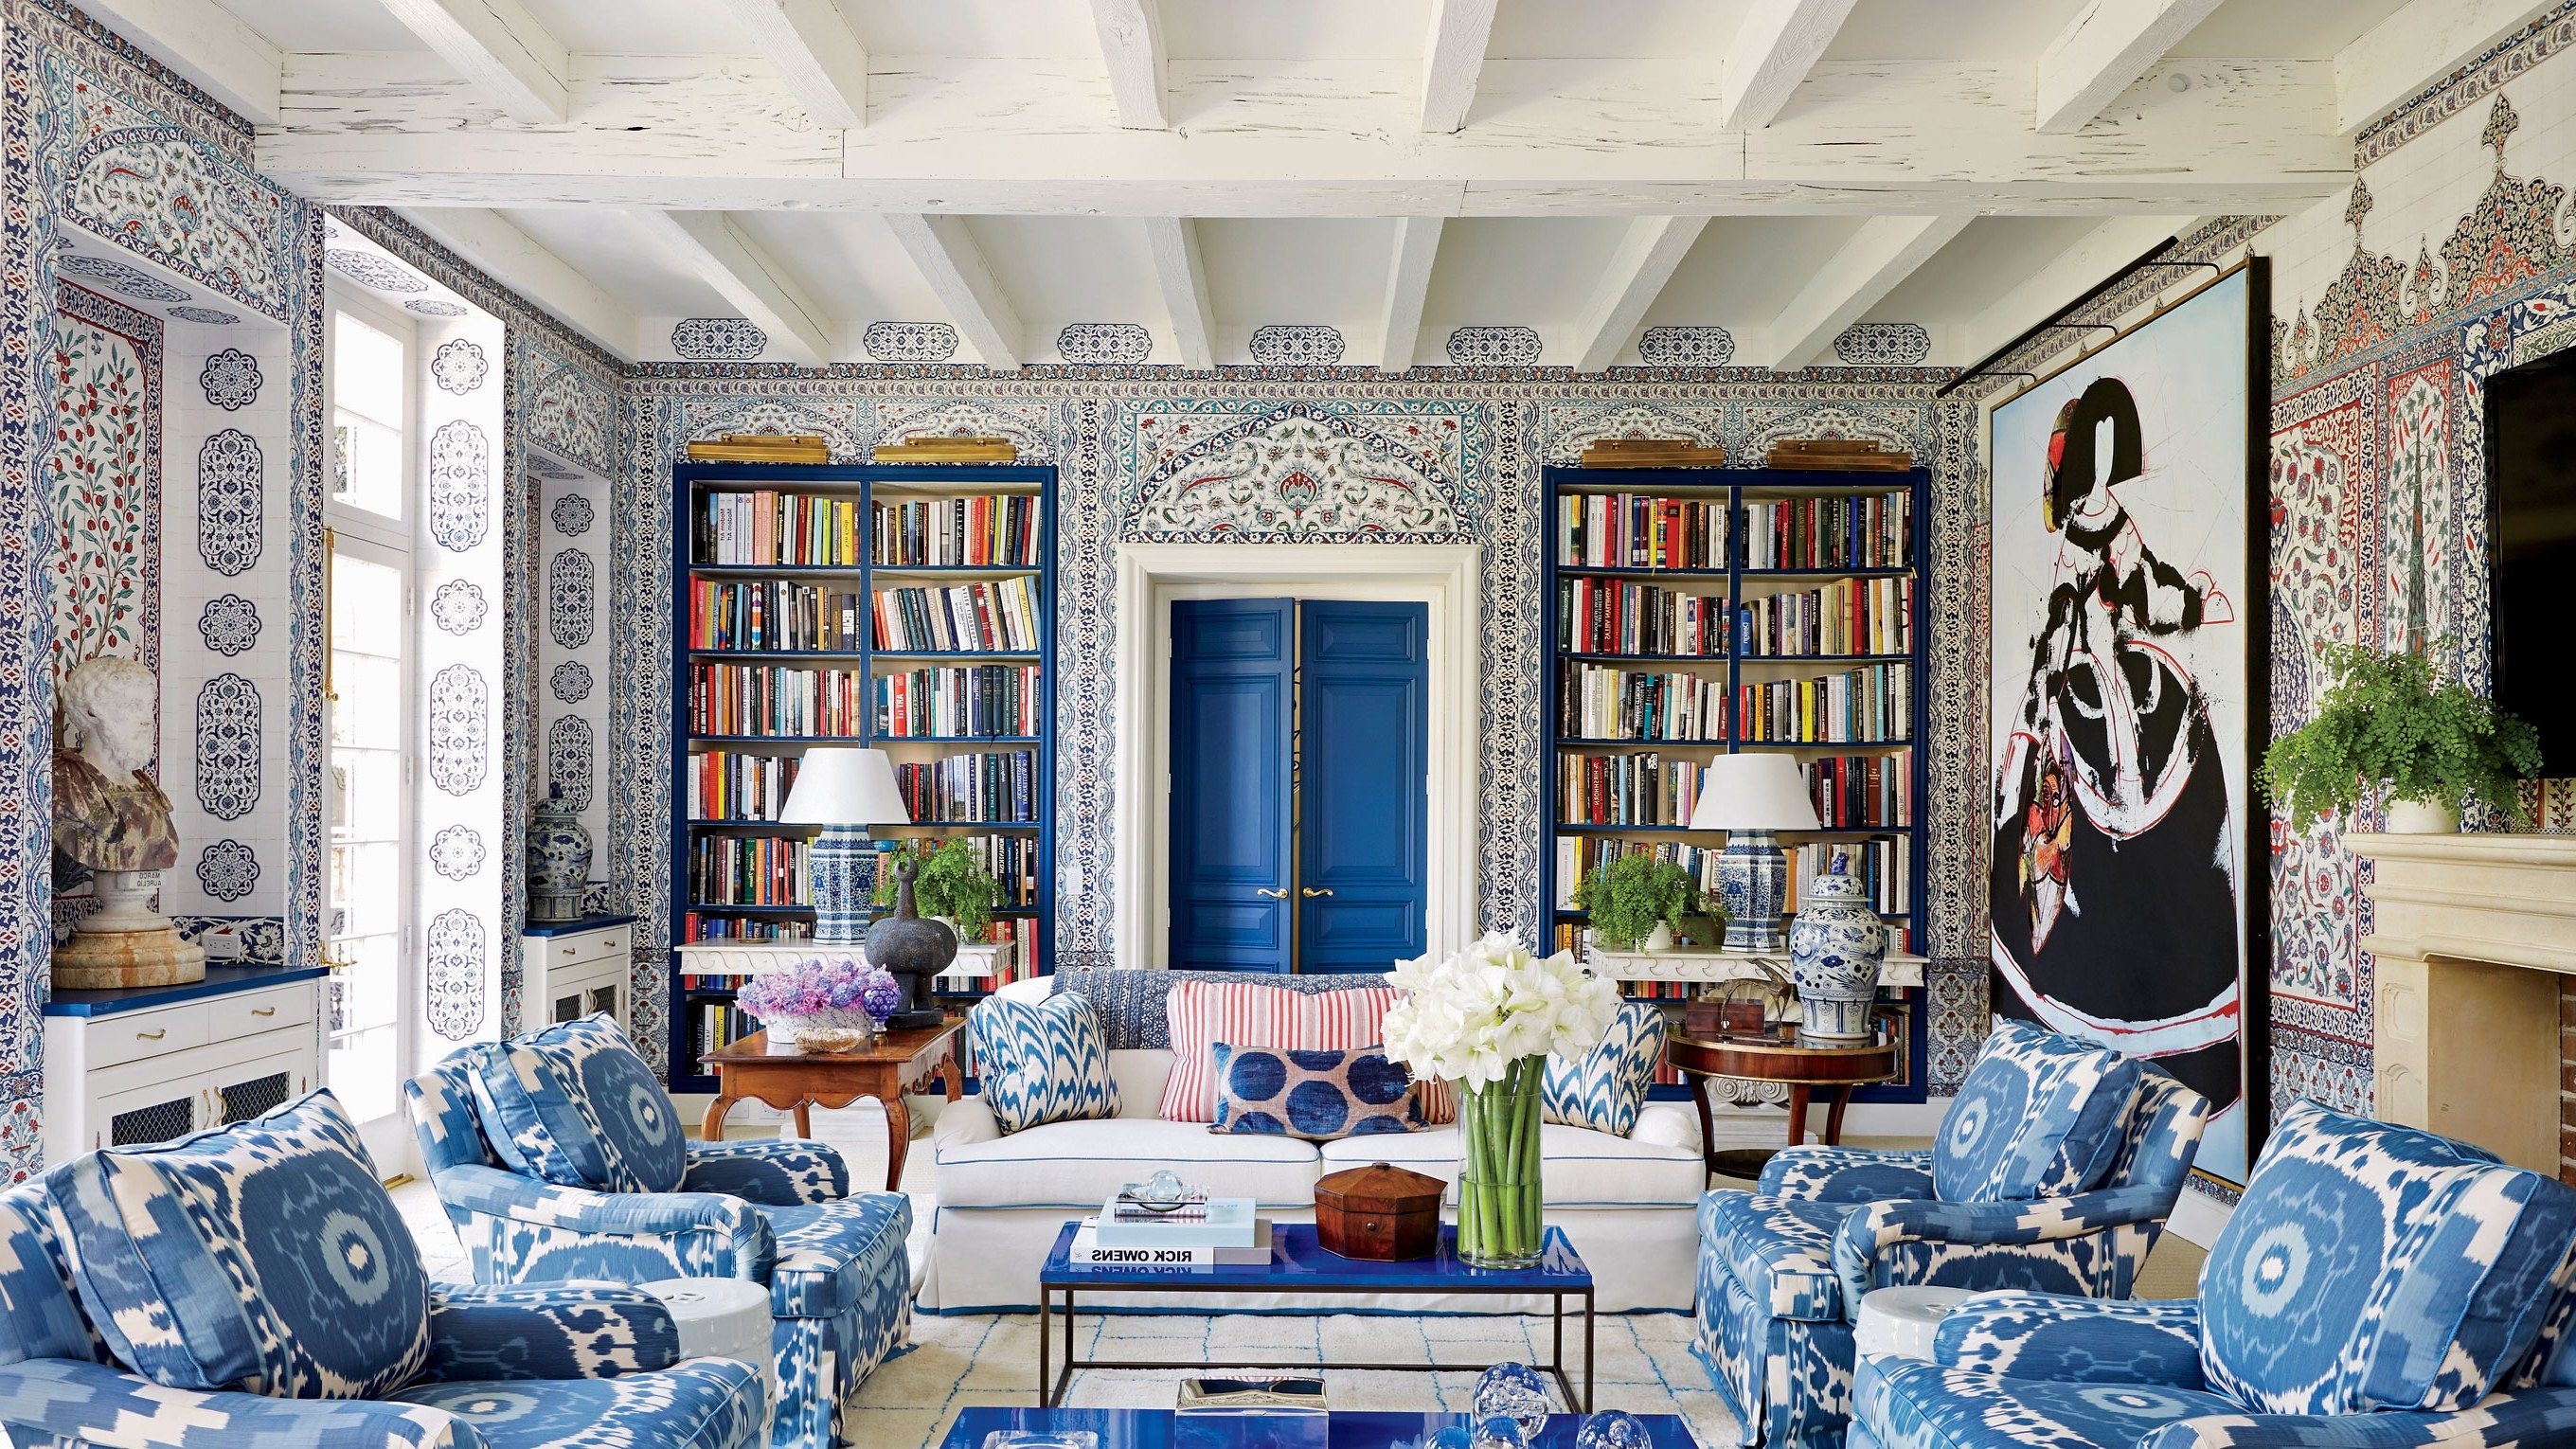 Architectural Digest (View 13 of 20)